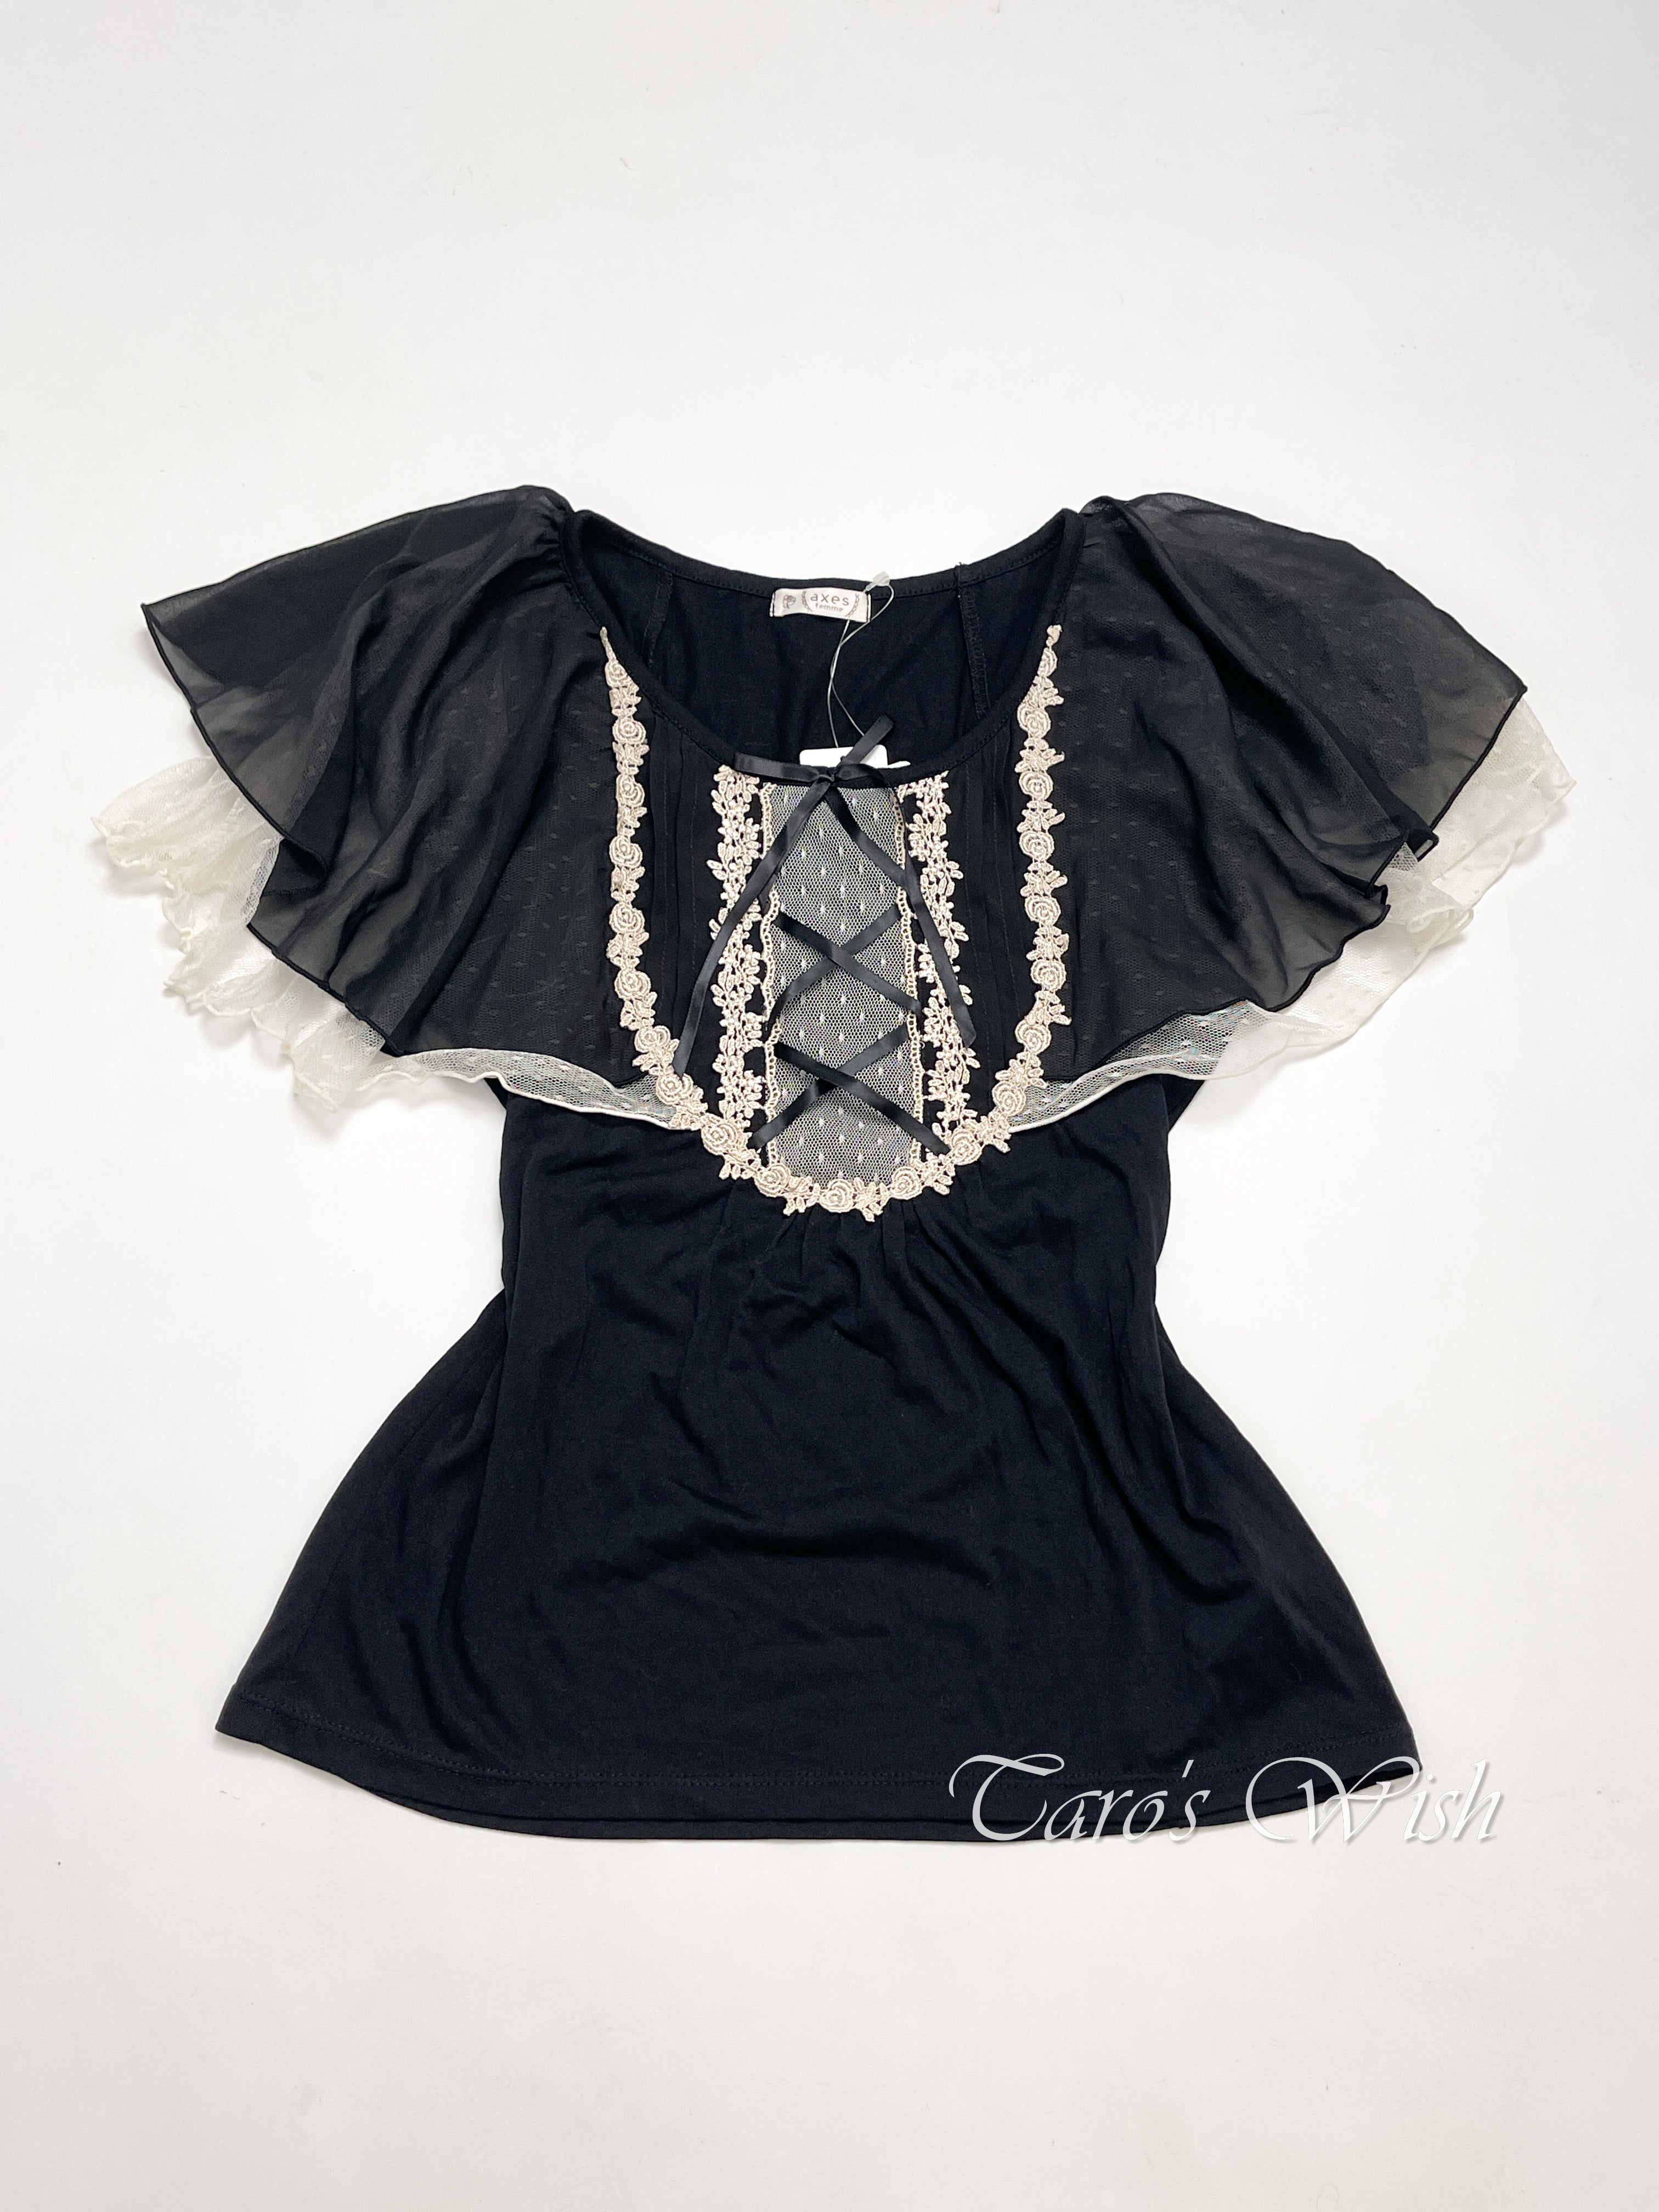 Axes Femme Lace Up Top – Taro's Wish